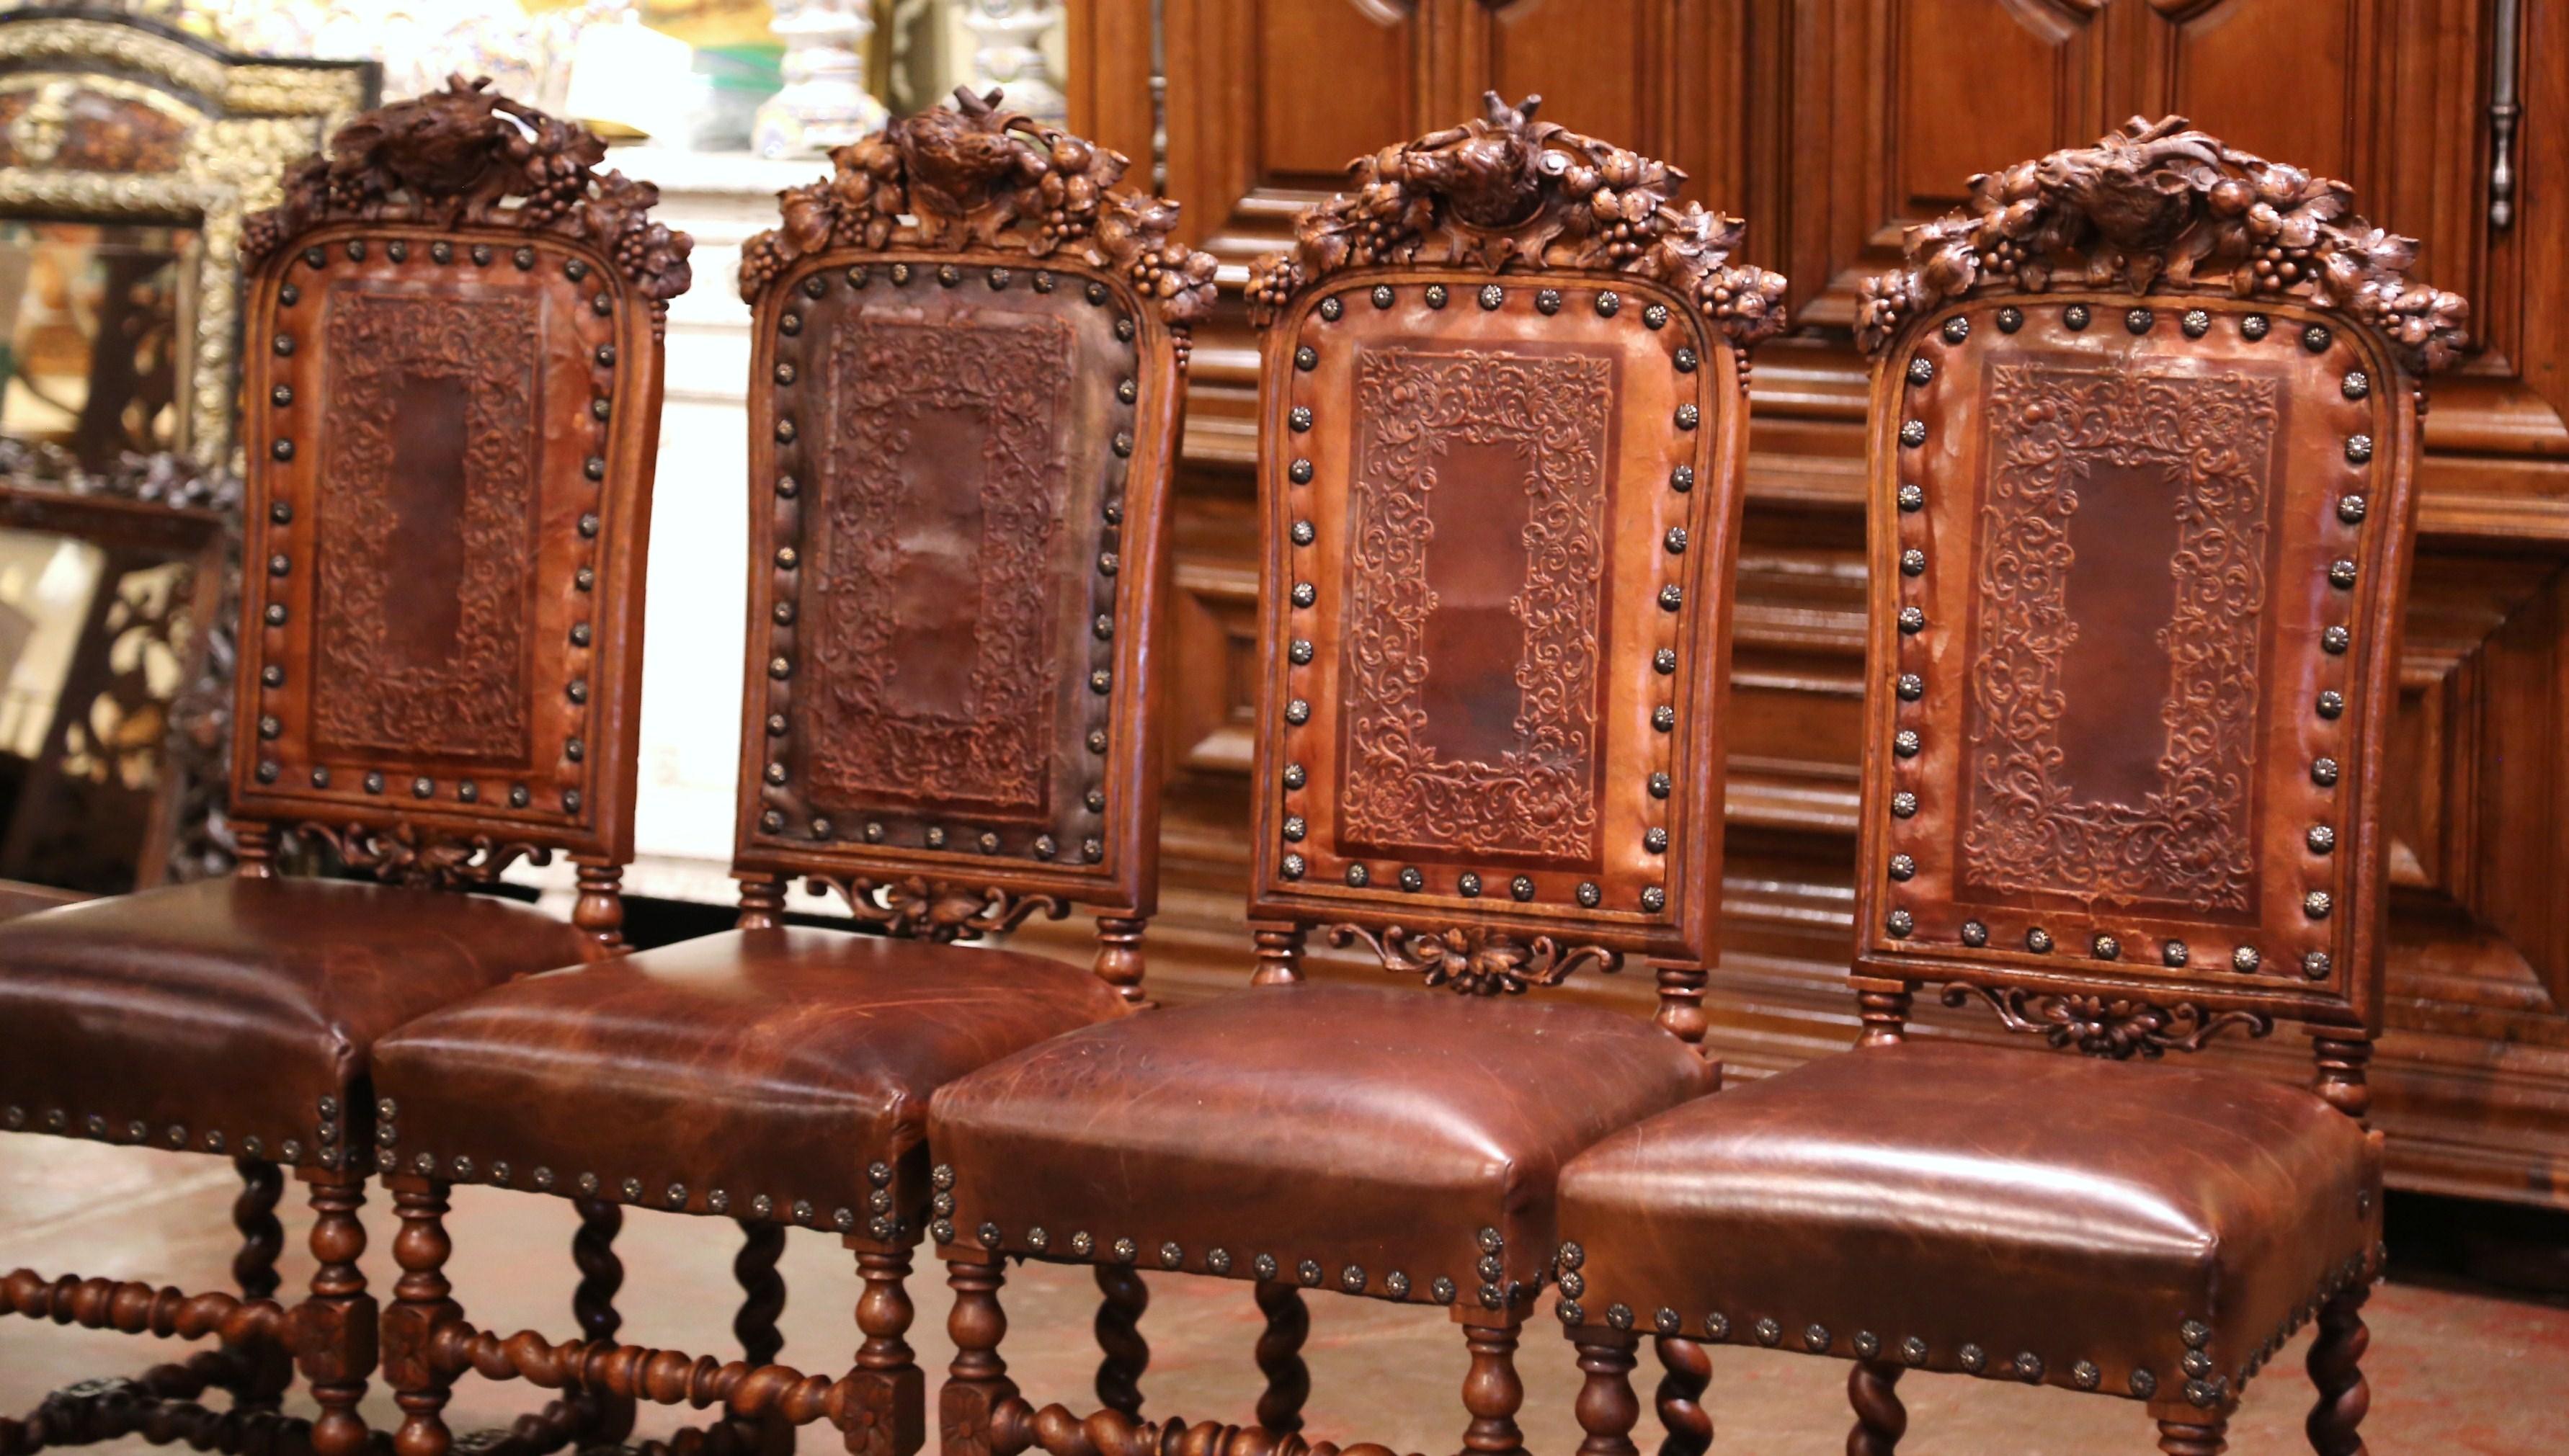 Decorate a wine cellar or dress a game table with this spectacular set of antique chairs. Crafted in France, circa 1860, each side chair stands on barley twist legs, decorated with an elegant carved stretcher. Each chair has exquisite carvings and